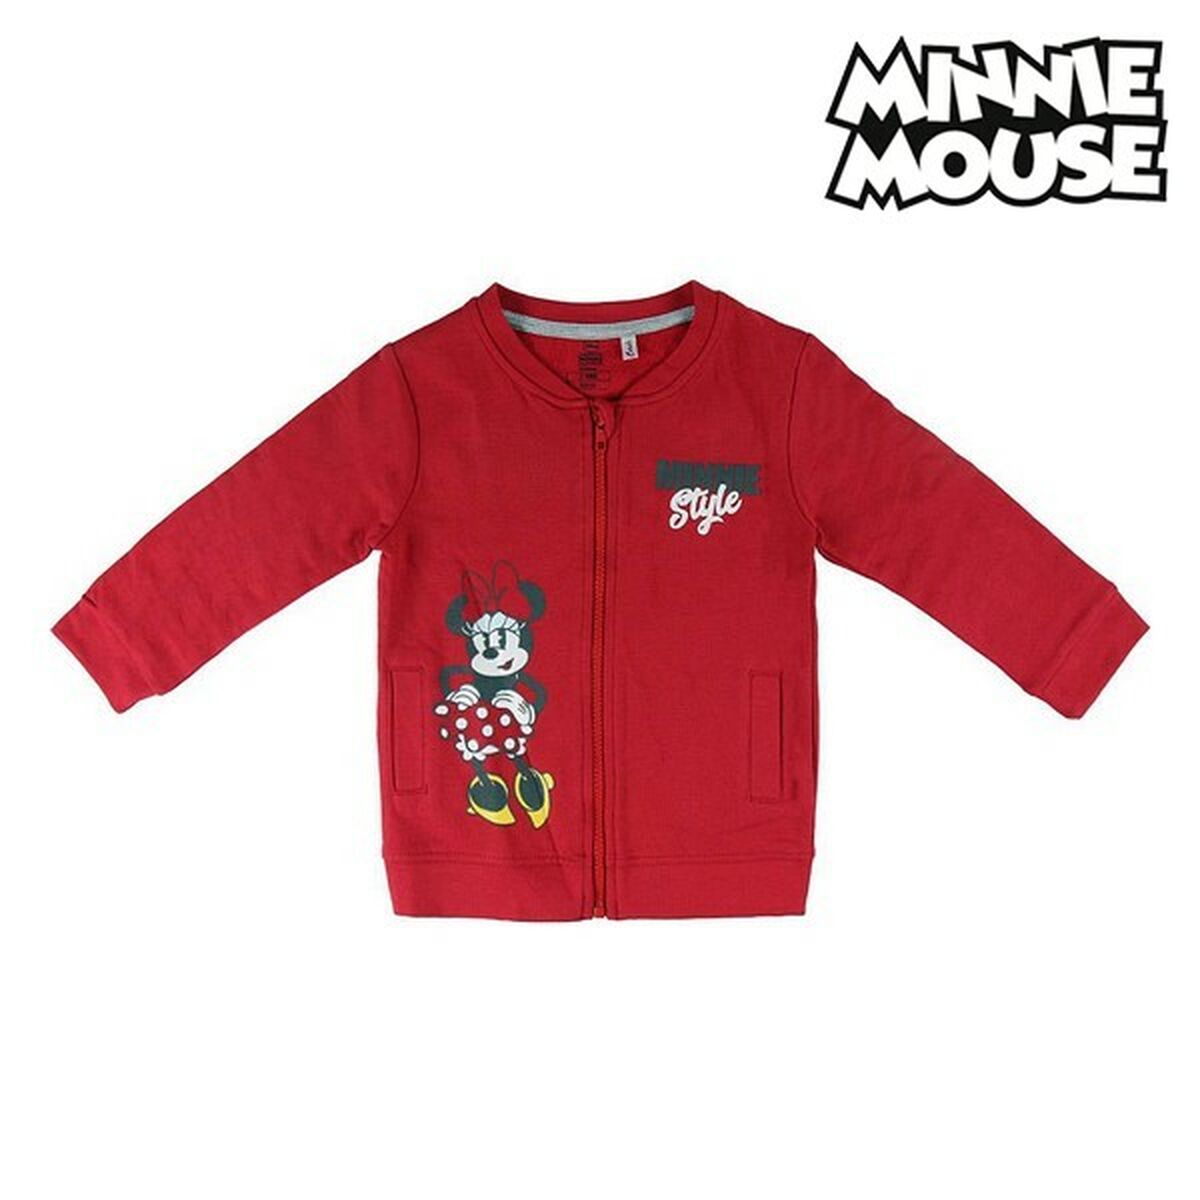 Children’s Tracksuit Minnie Mouse 74789 Red